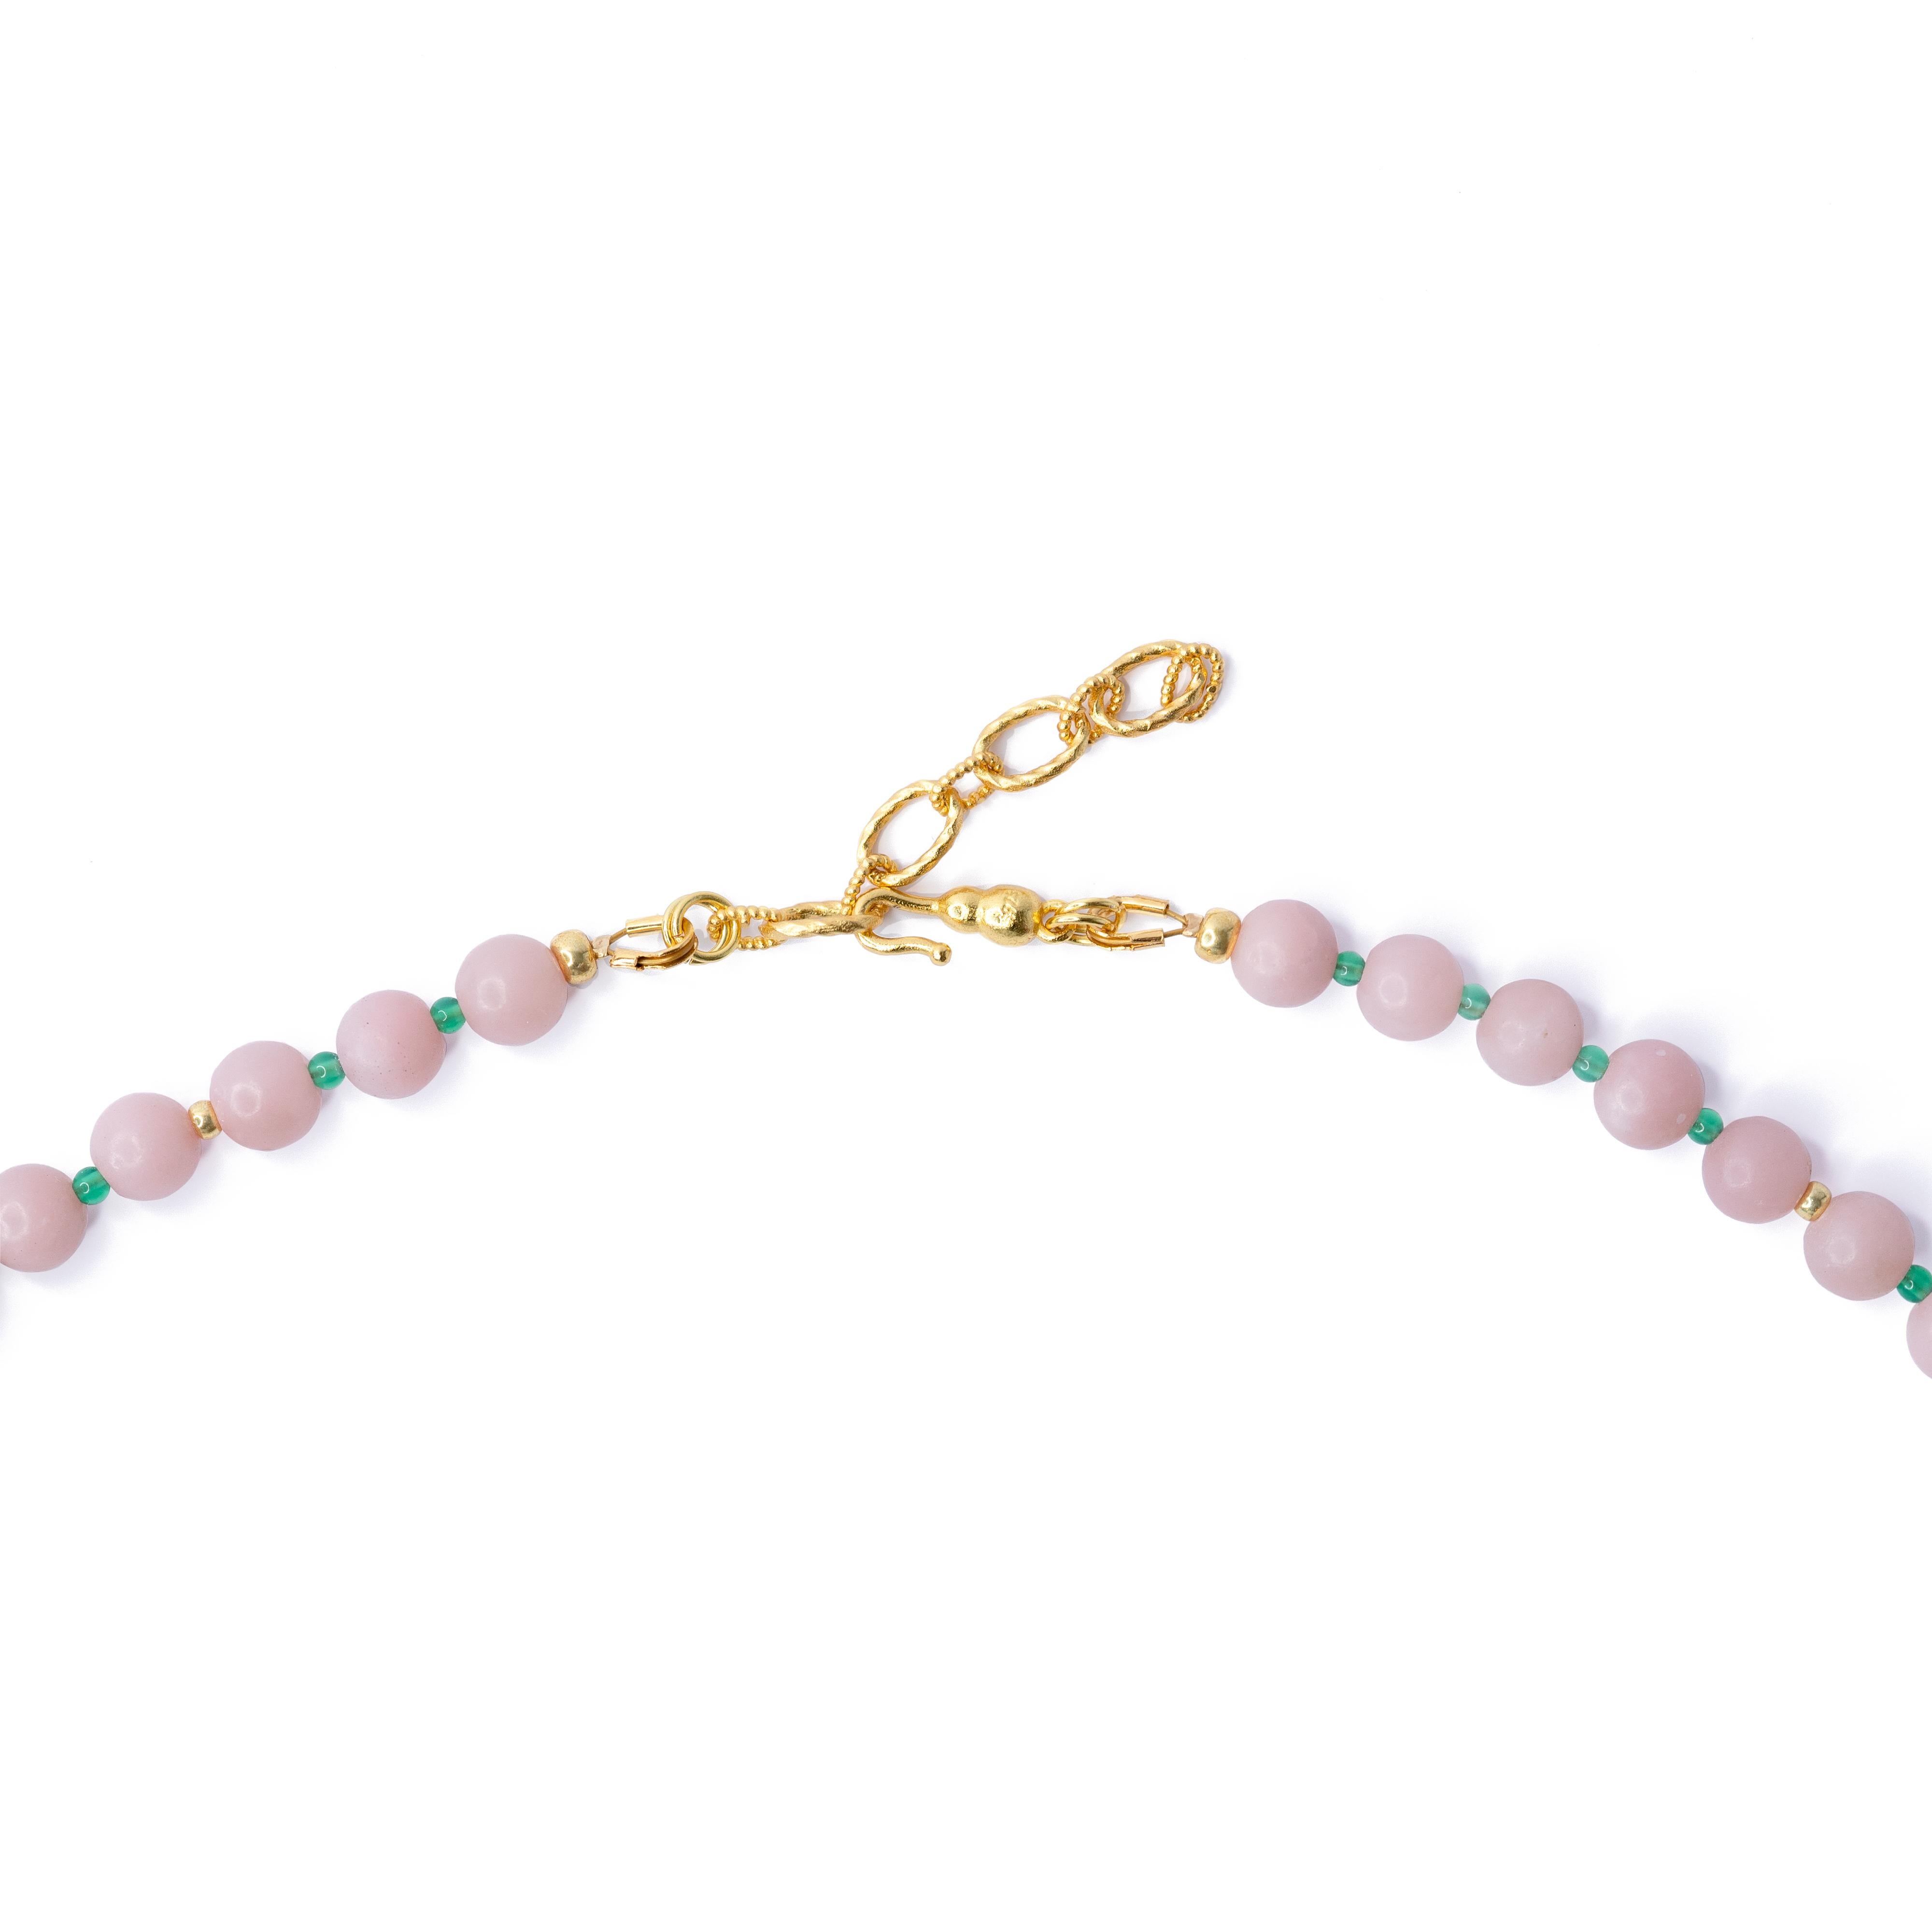 Wearing this Pink Peruvian Opal necklace will make you feel as if you've captured the blush of dawn and woven it around your neck. Each opal whispers stories of ancient beauty and timeless grace, making you feel serene and softly radiant. It’s as if